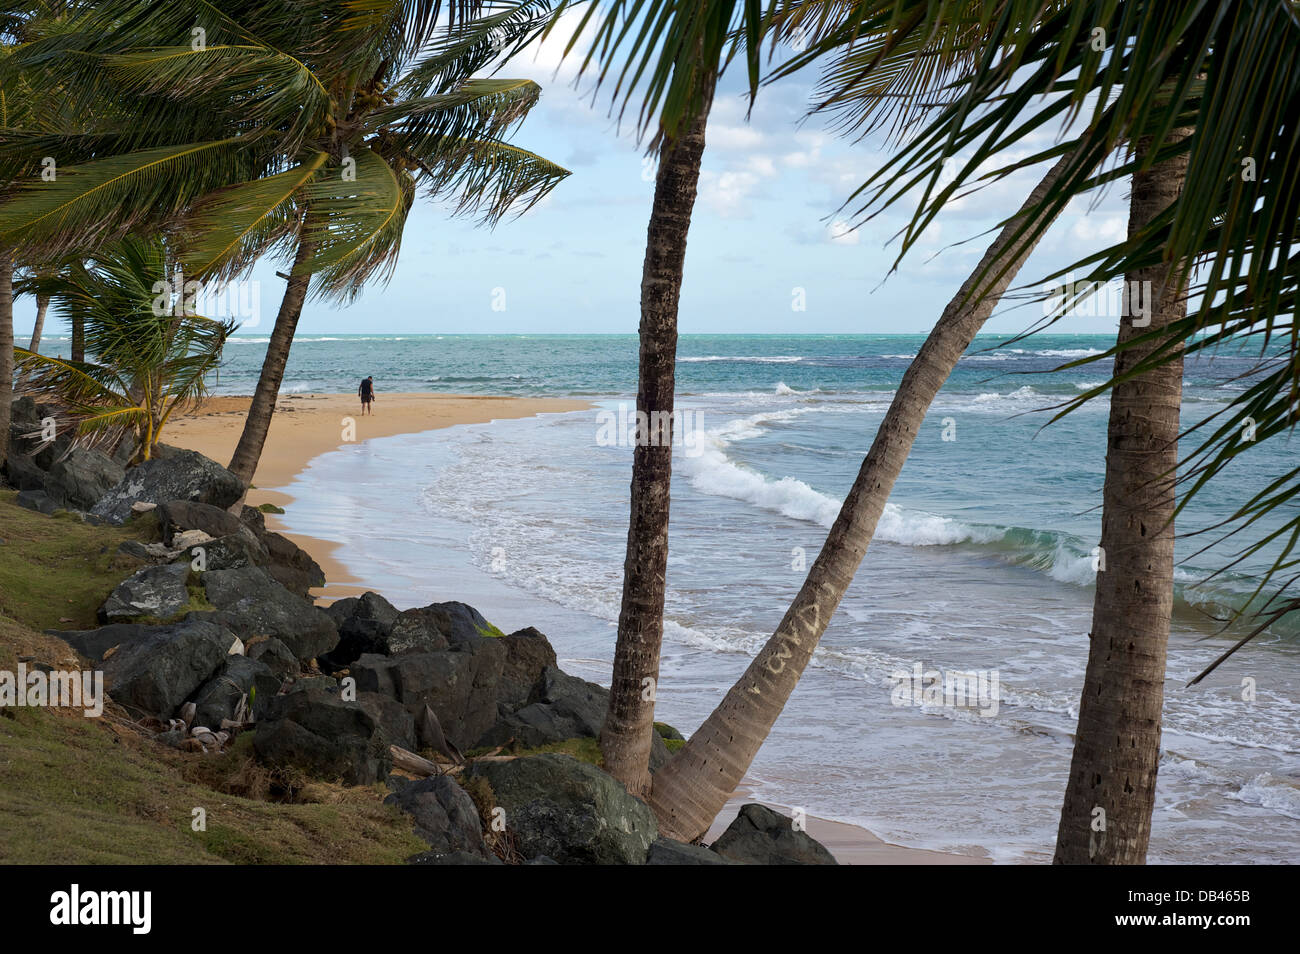 View of beach at Luquillo, Puerto Rico Stock Photo